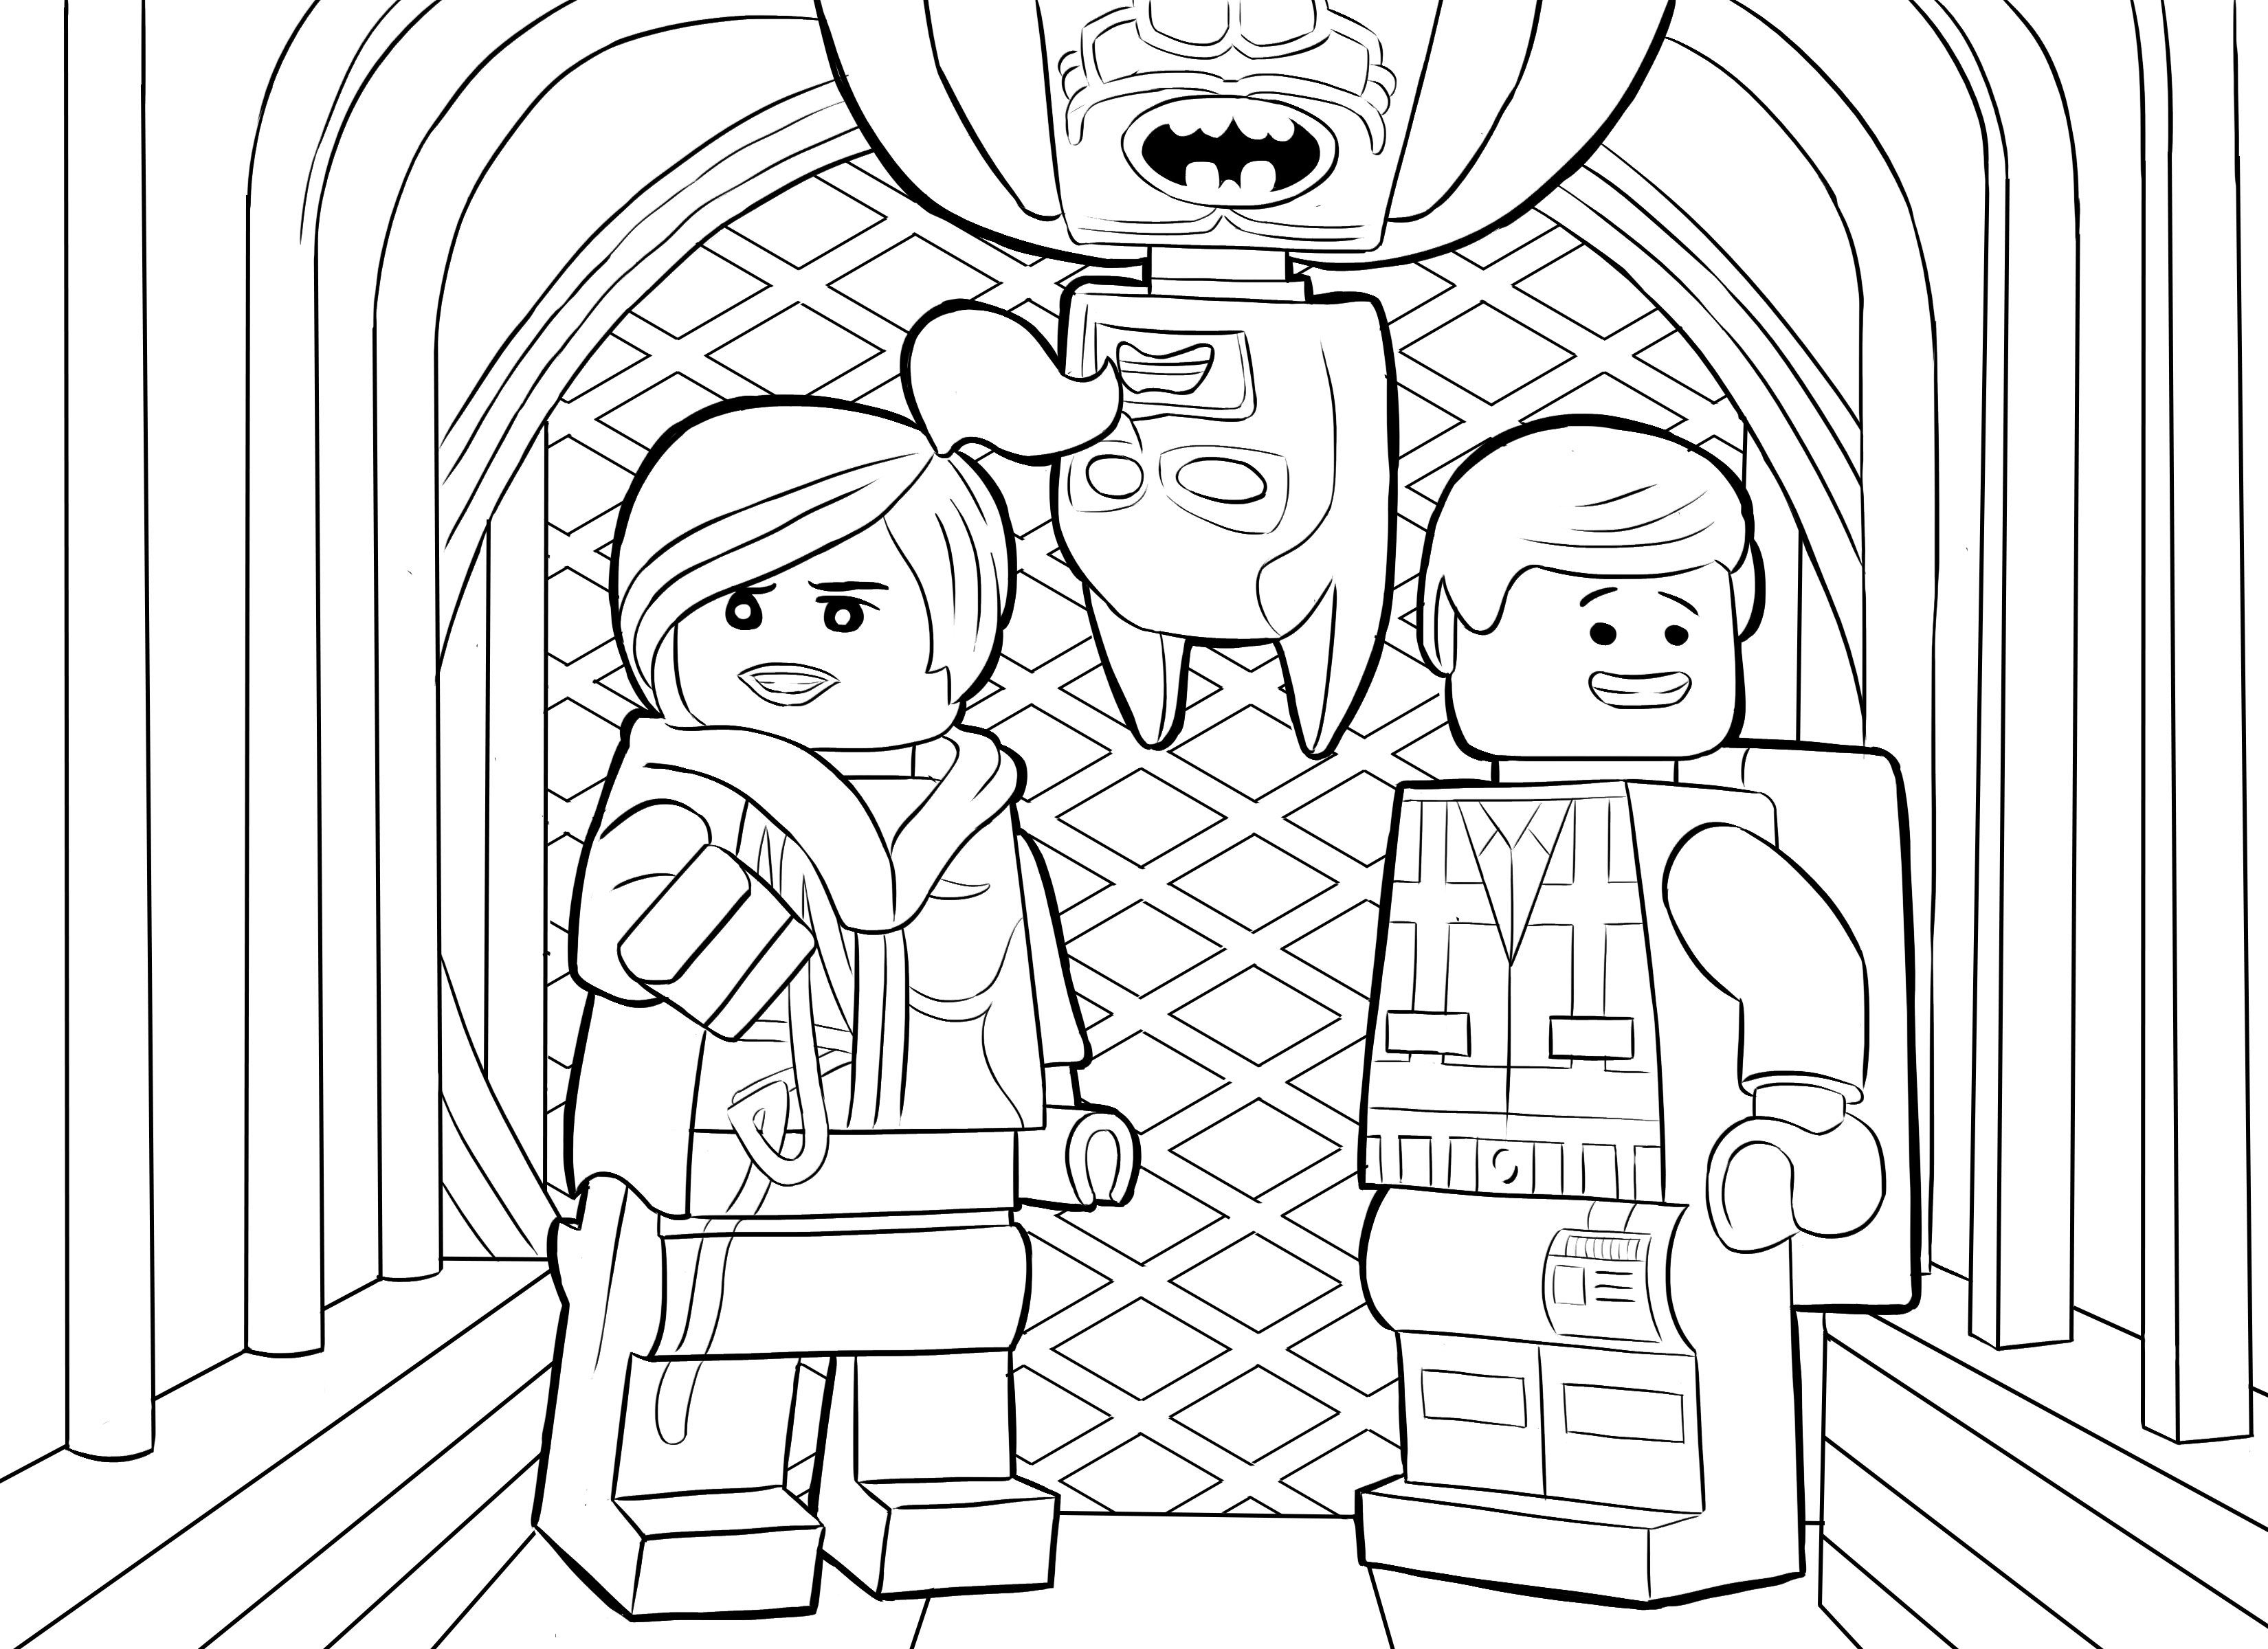 Lego Superhero Coloring Pages Best Coloring Pages For Kids